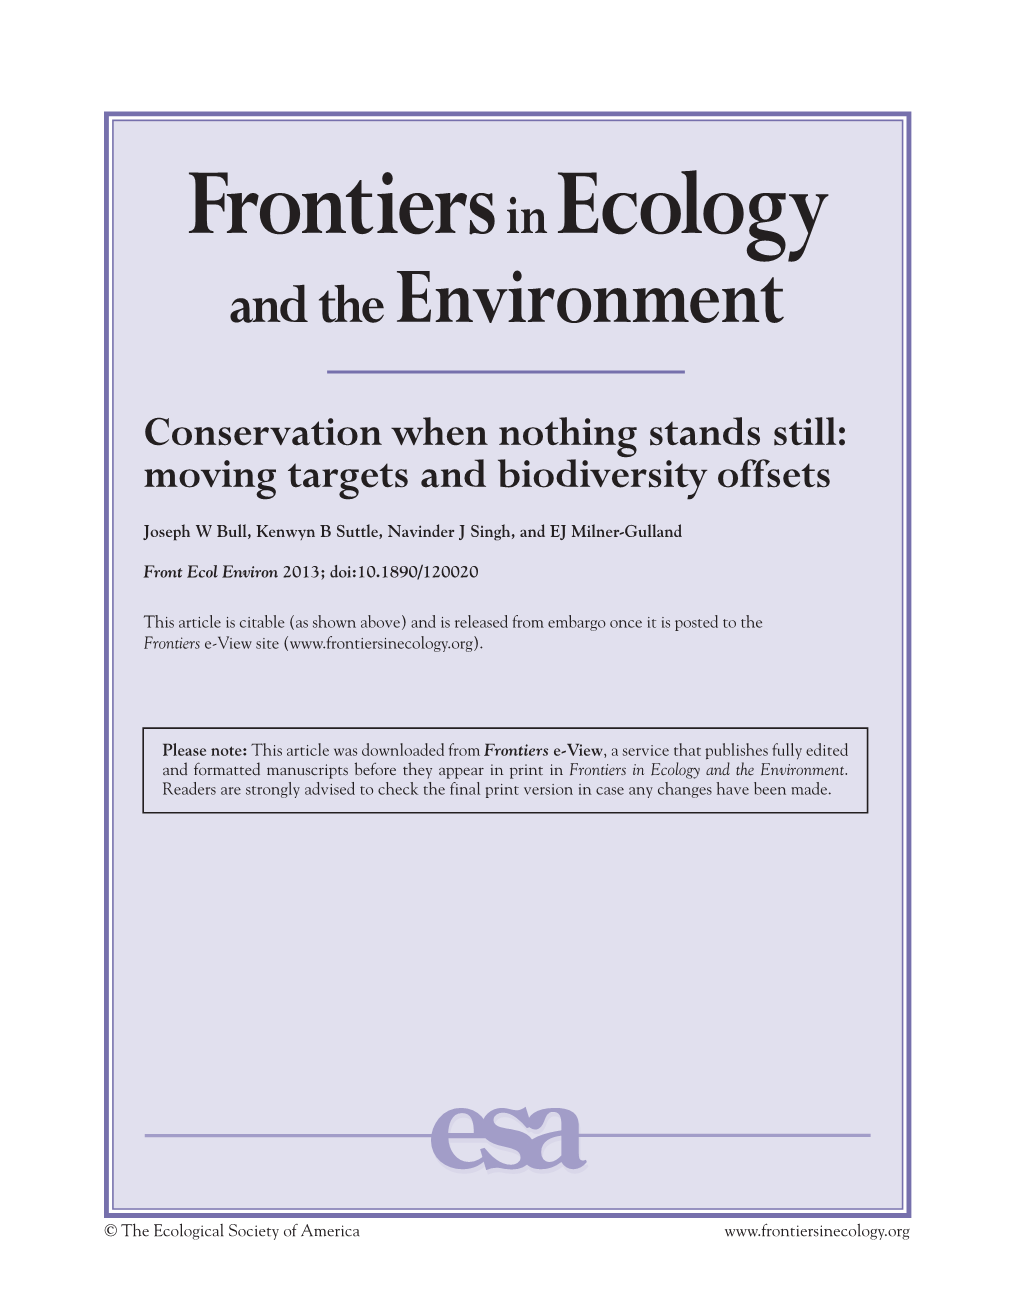 Moving Targets and Biodiversity Offsets